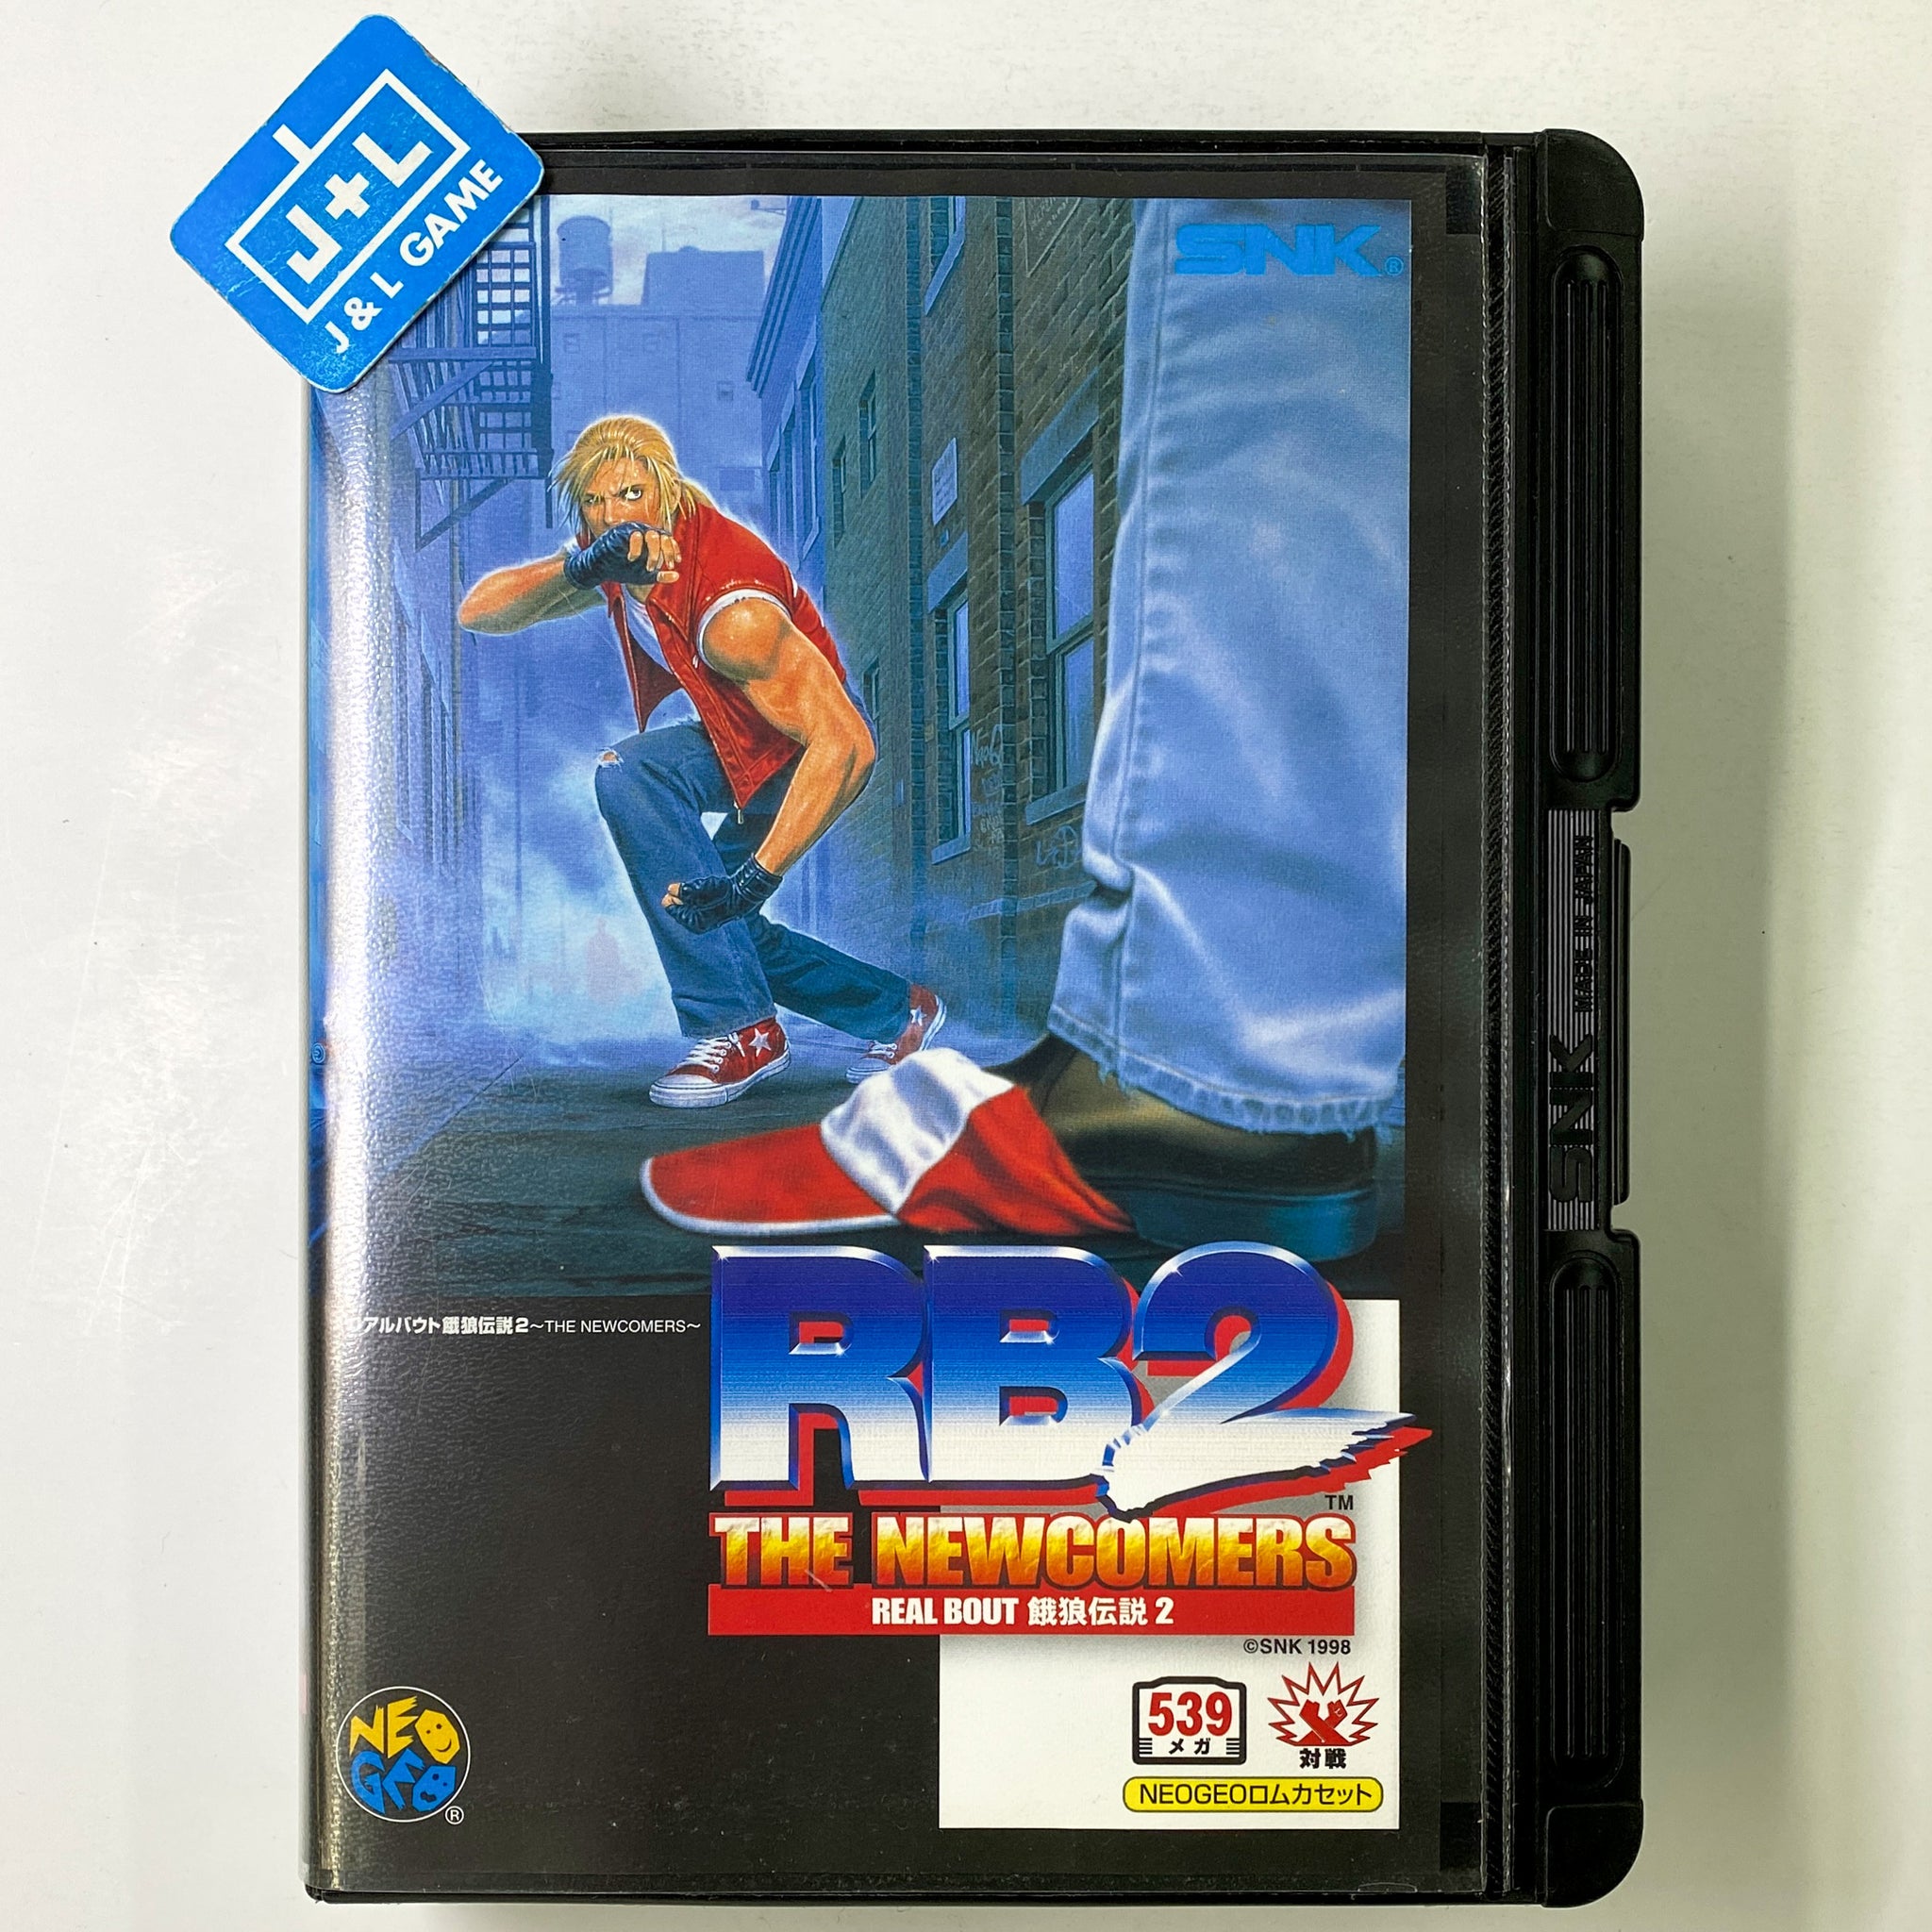 Fatal Fury Special [Japan Import]